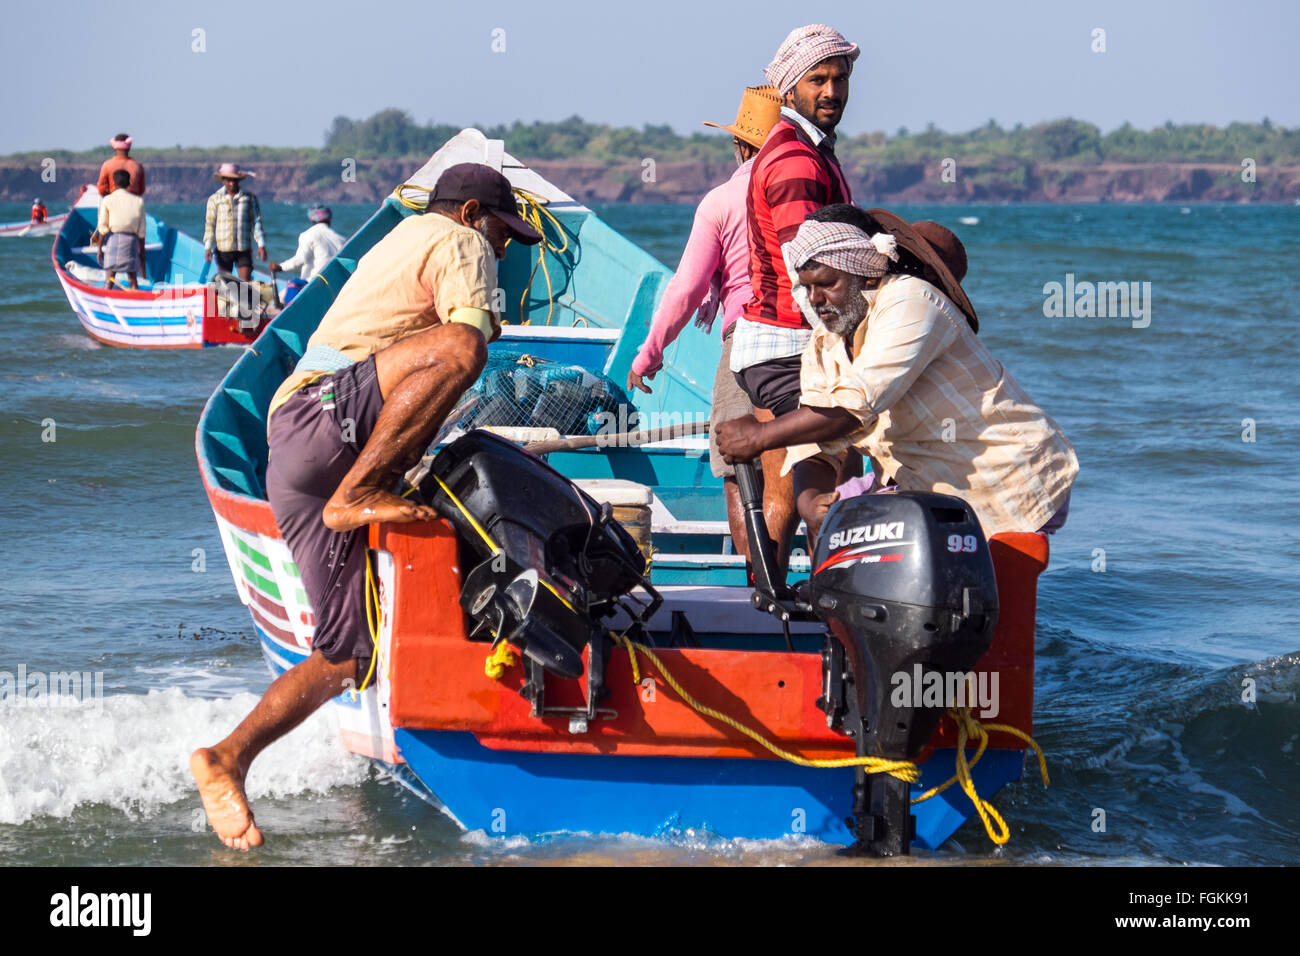 Fishermen preparing to go out in their boats on a beach near Malvan in Maharashtra, southern India Stock Photo